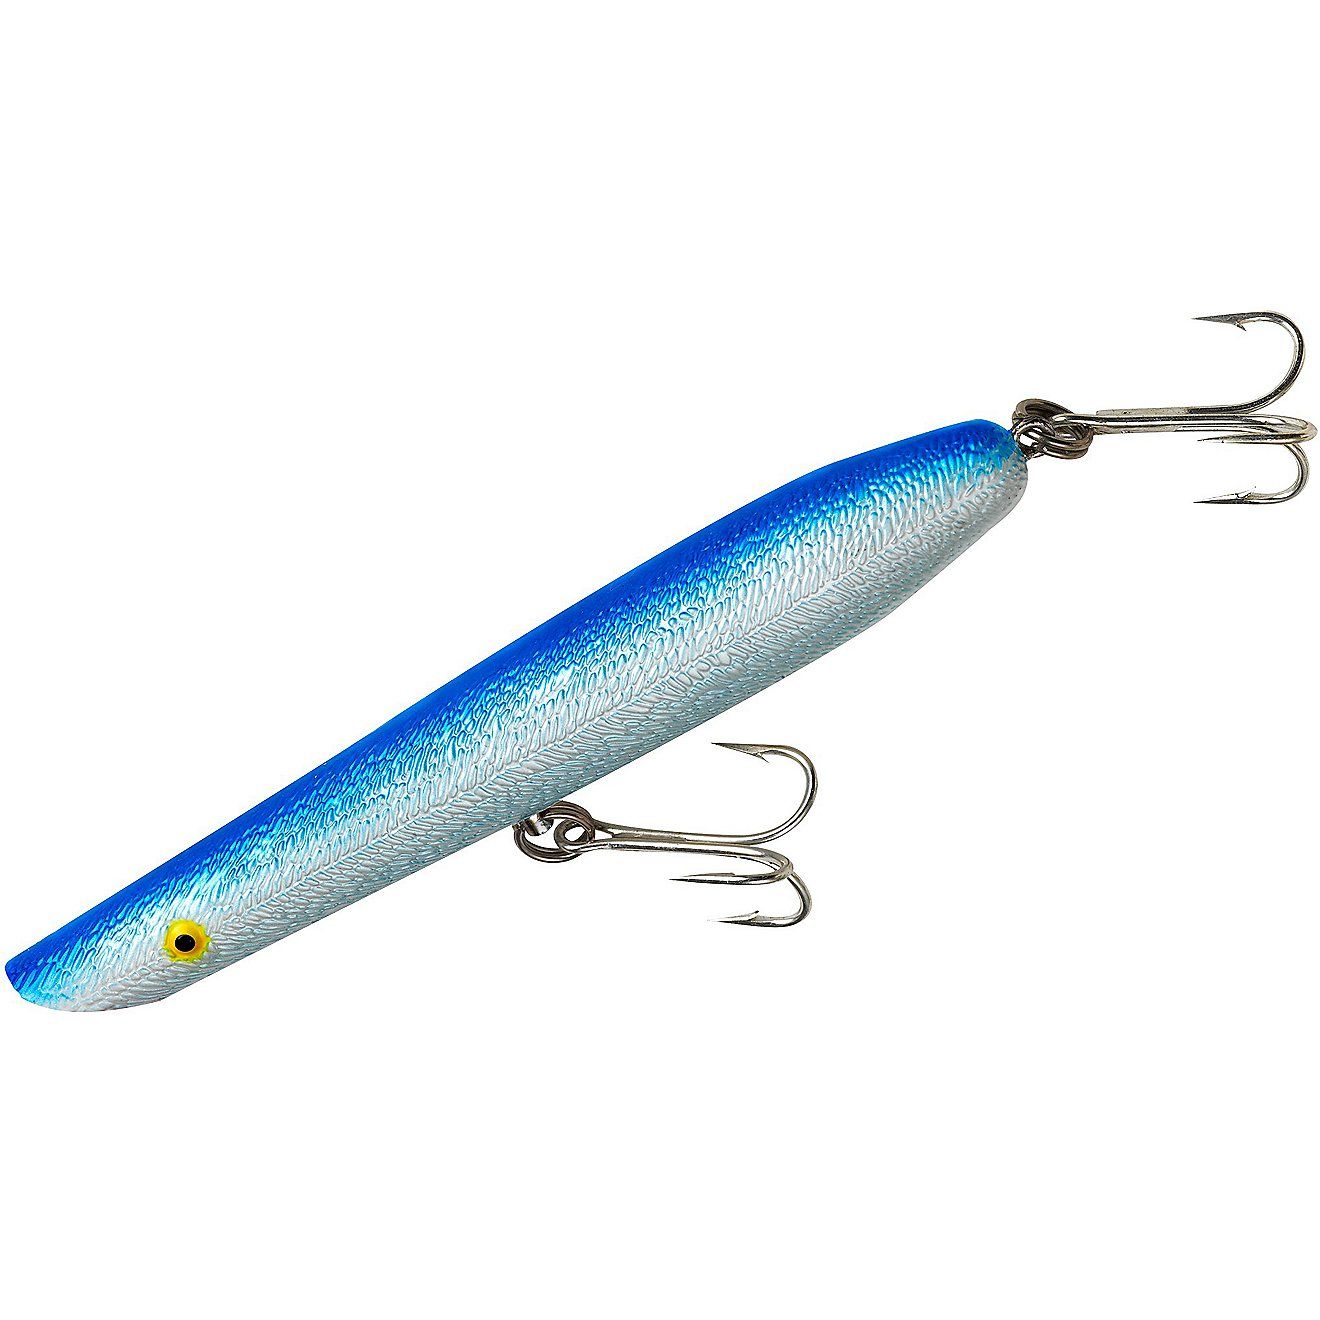 Cotton Cordell Pencil Popper 6" Topwater Bait | Academy Sports + Outdoor Affiliate